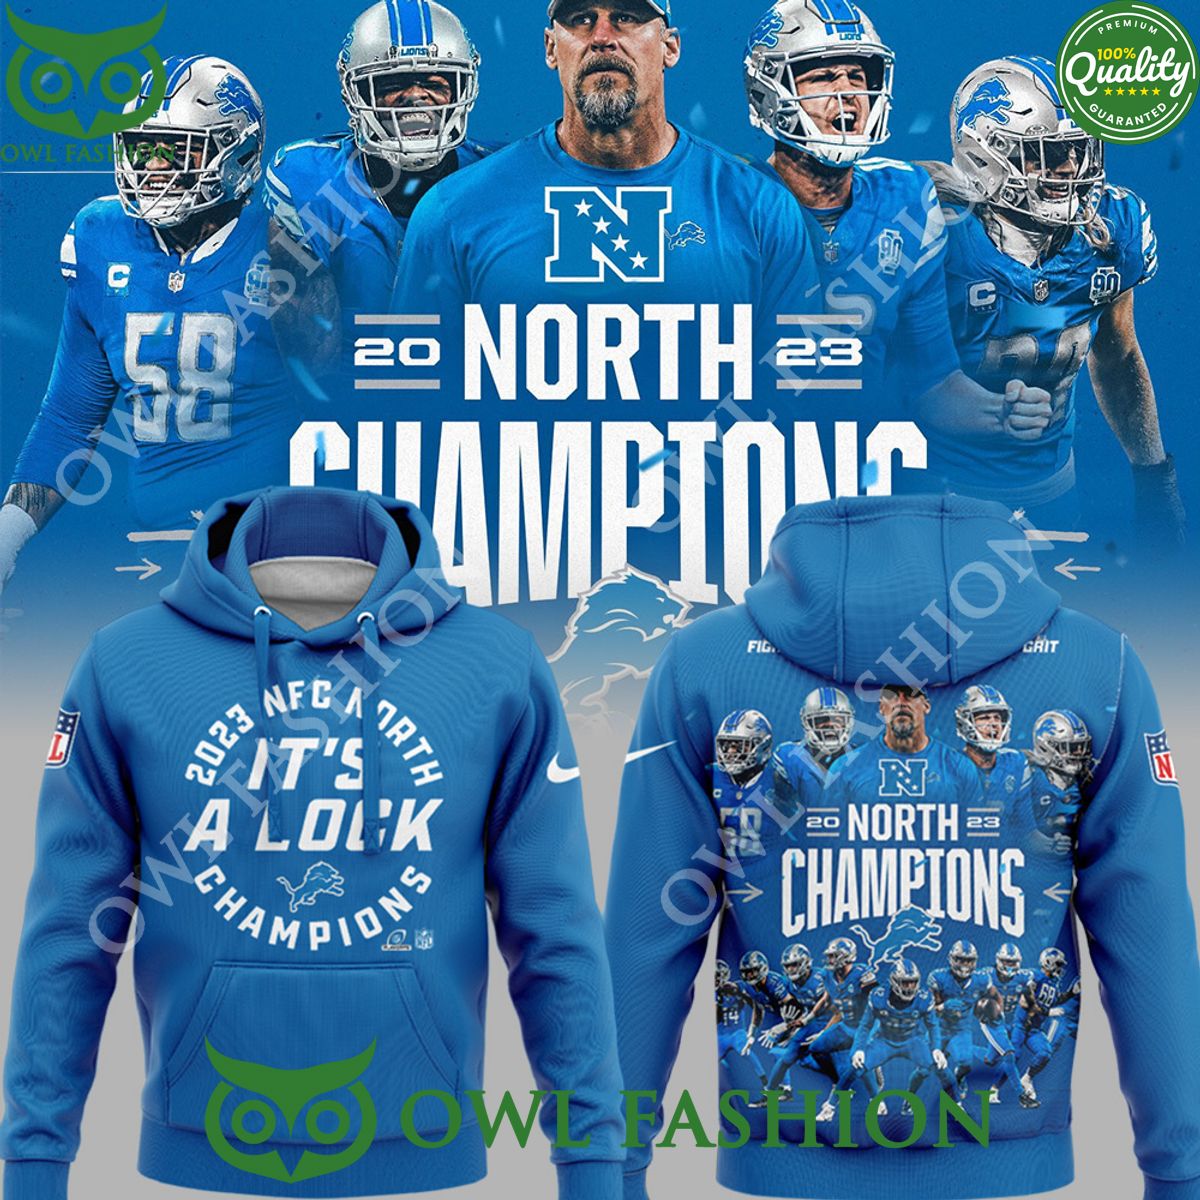 champions 2023 nfc north its a lock detroit lions hoodie and pant 1 Us5rV.jpg